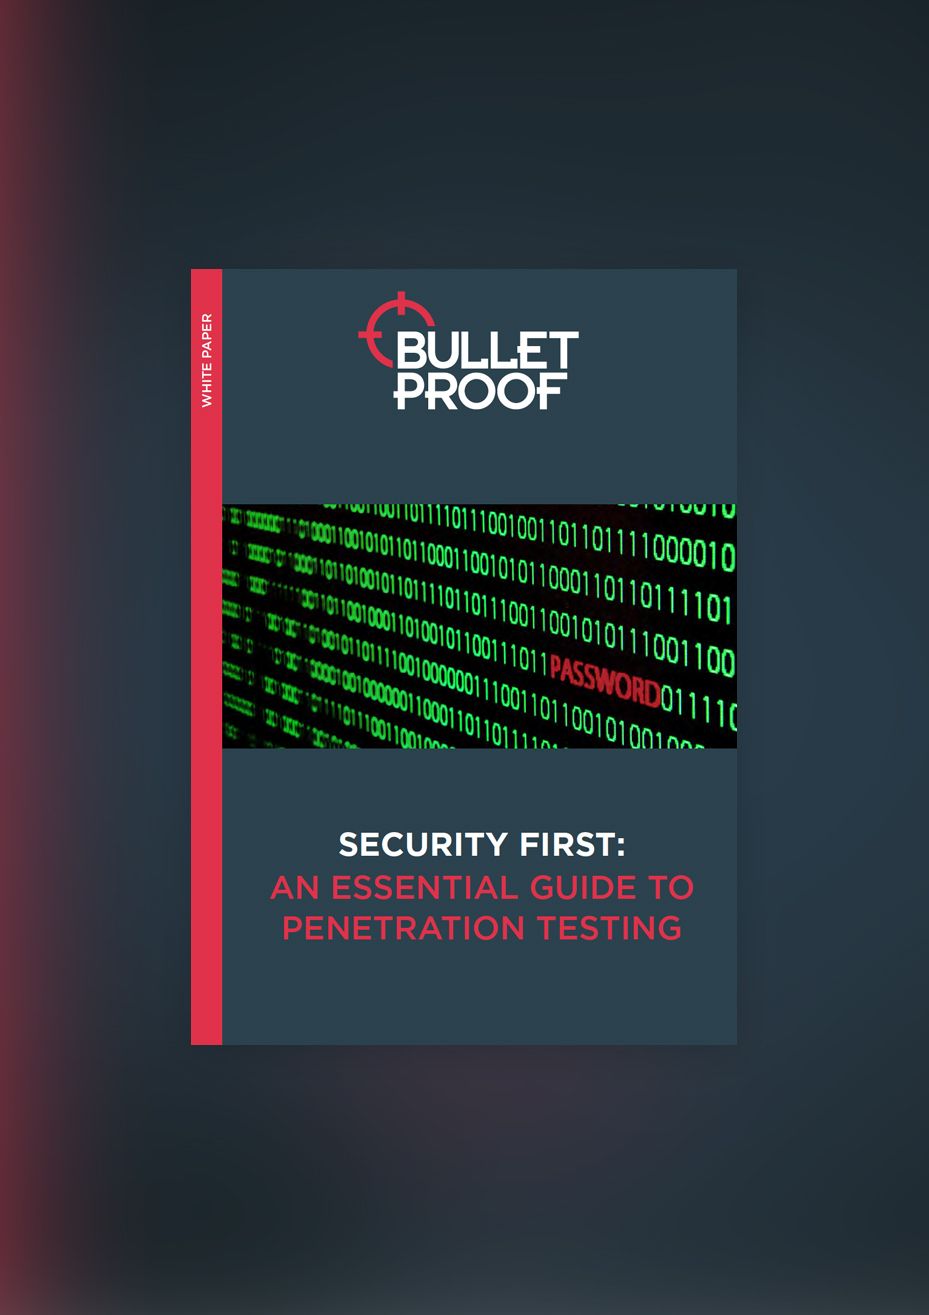 An essential guide to penetration testing